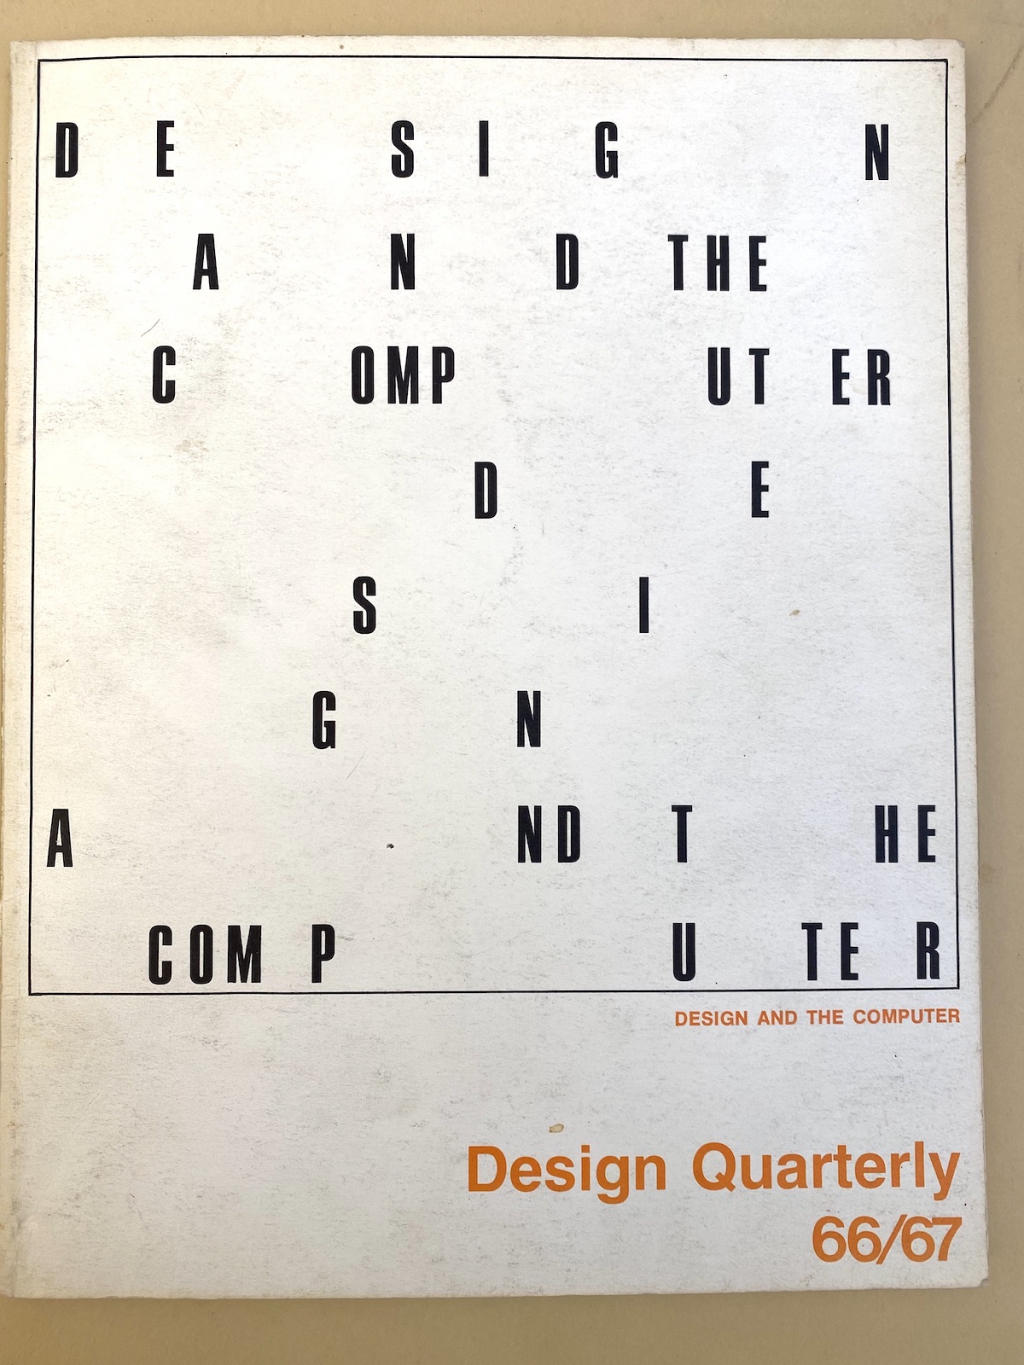 Design Quarterly Design and the Computer issue